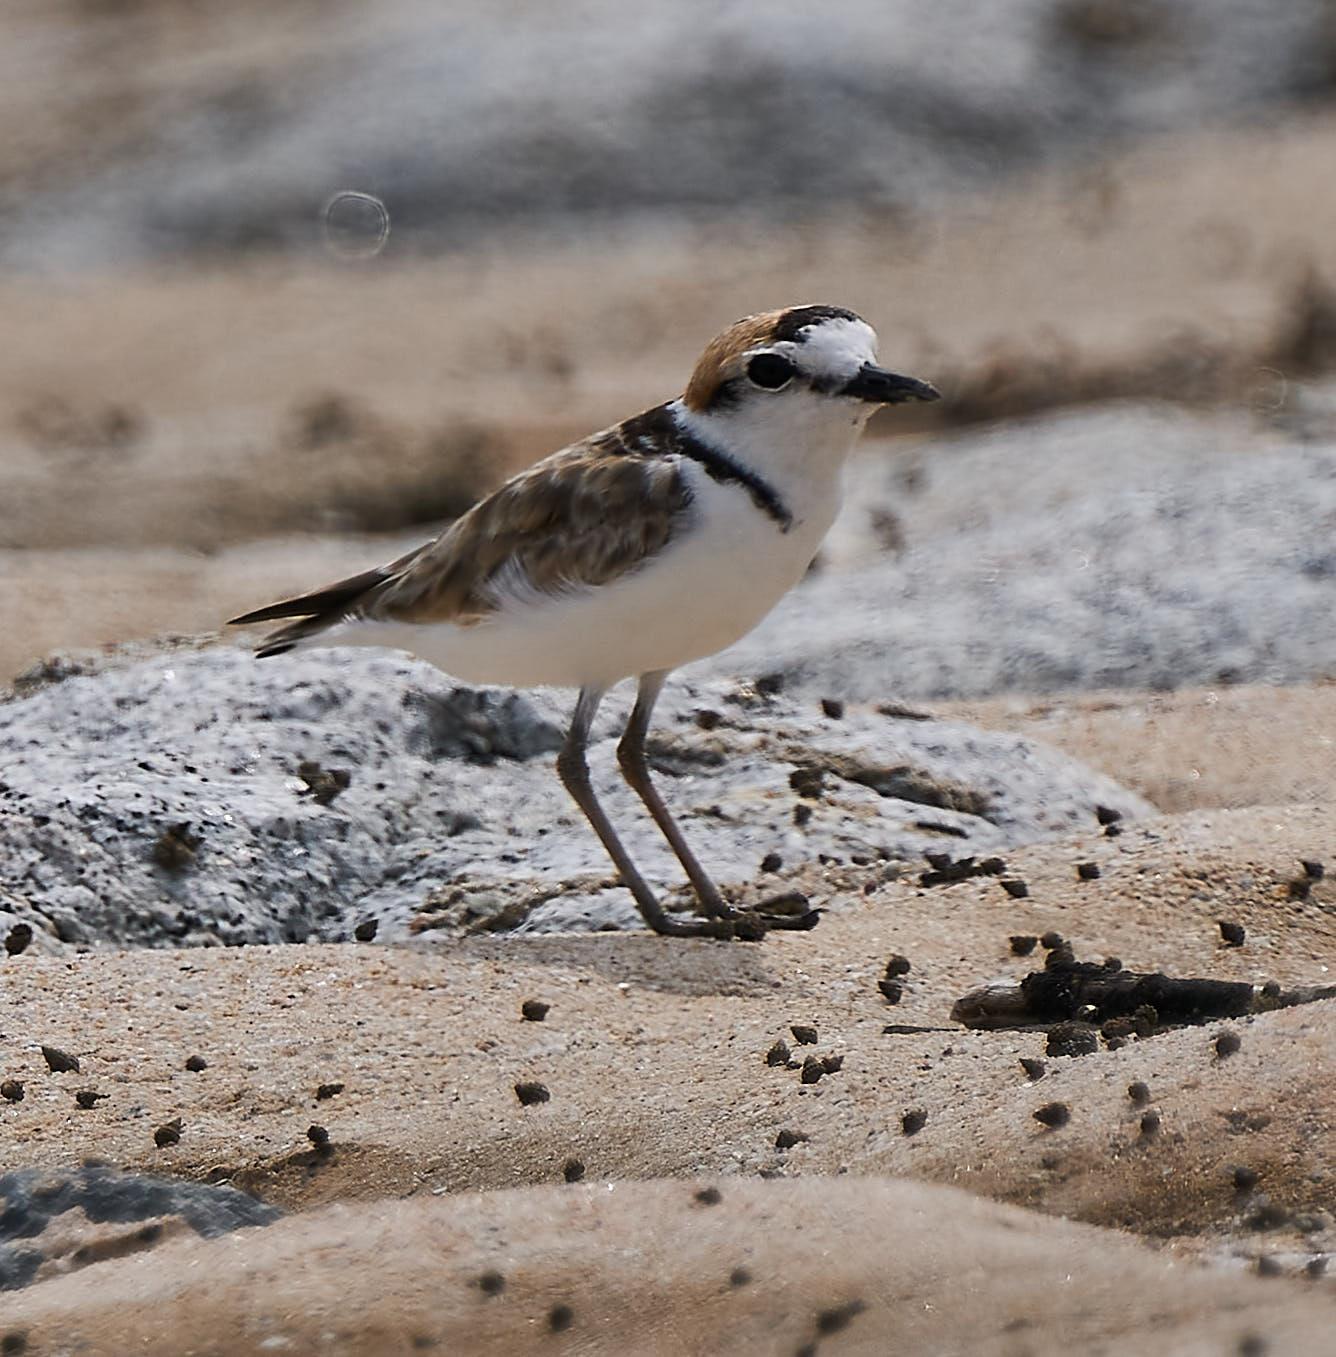 Malaysian Plover Photo by Steven Cheong